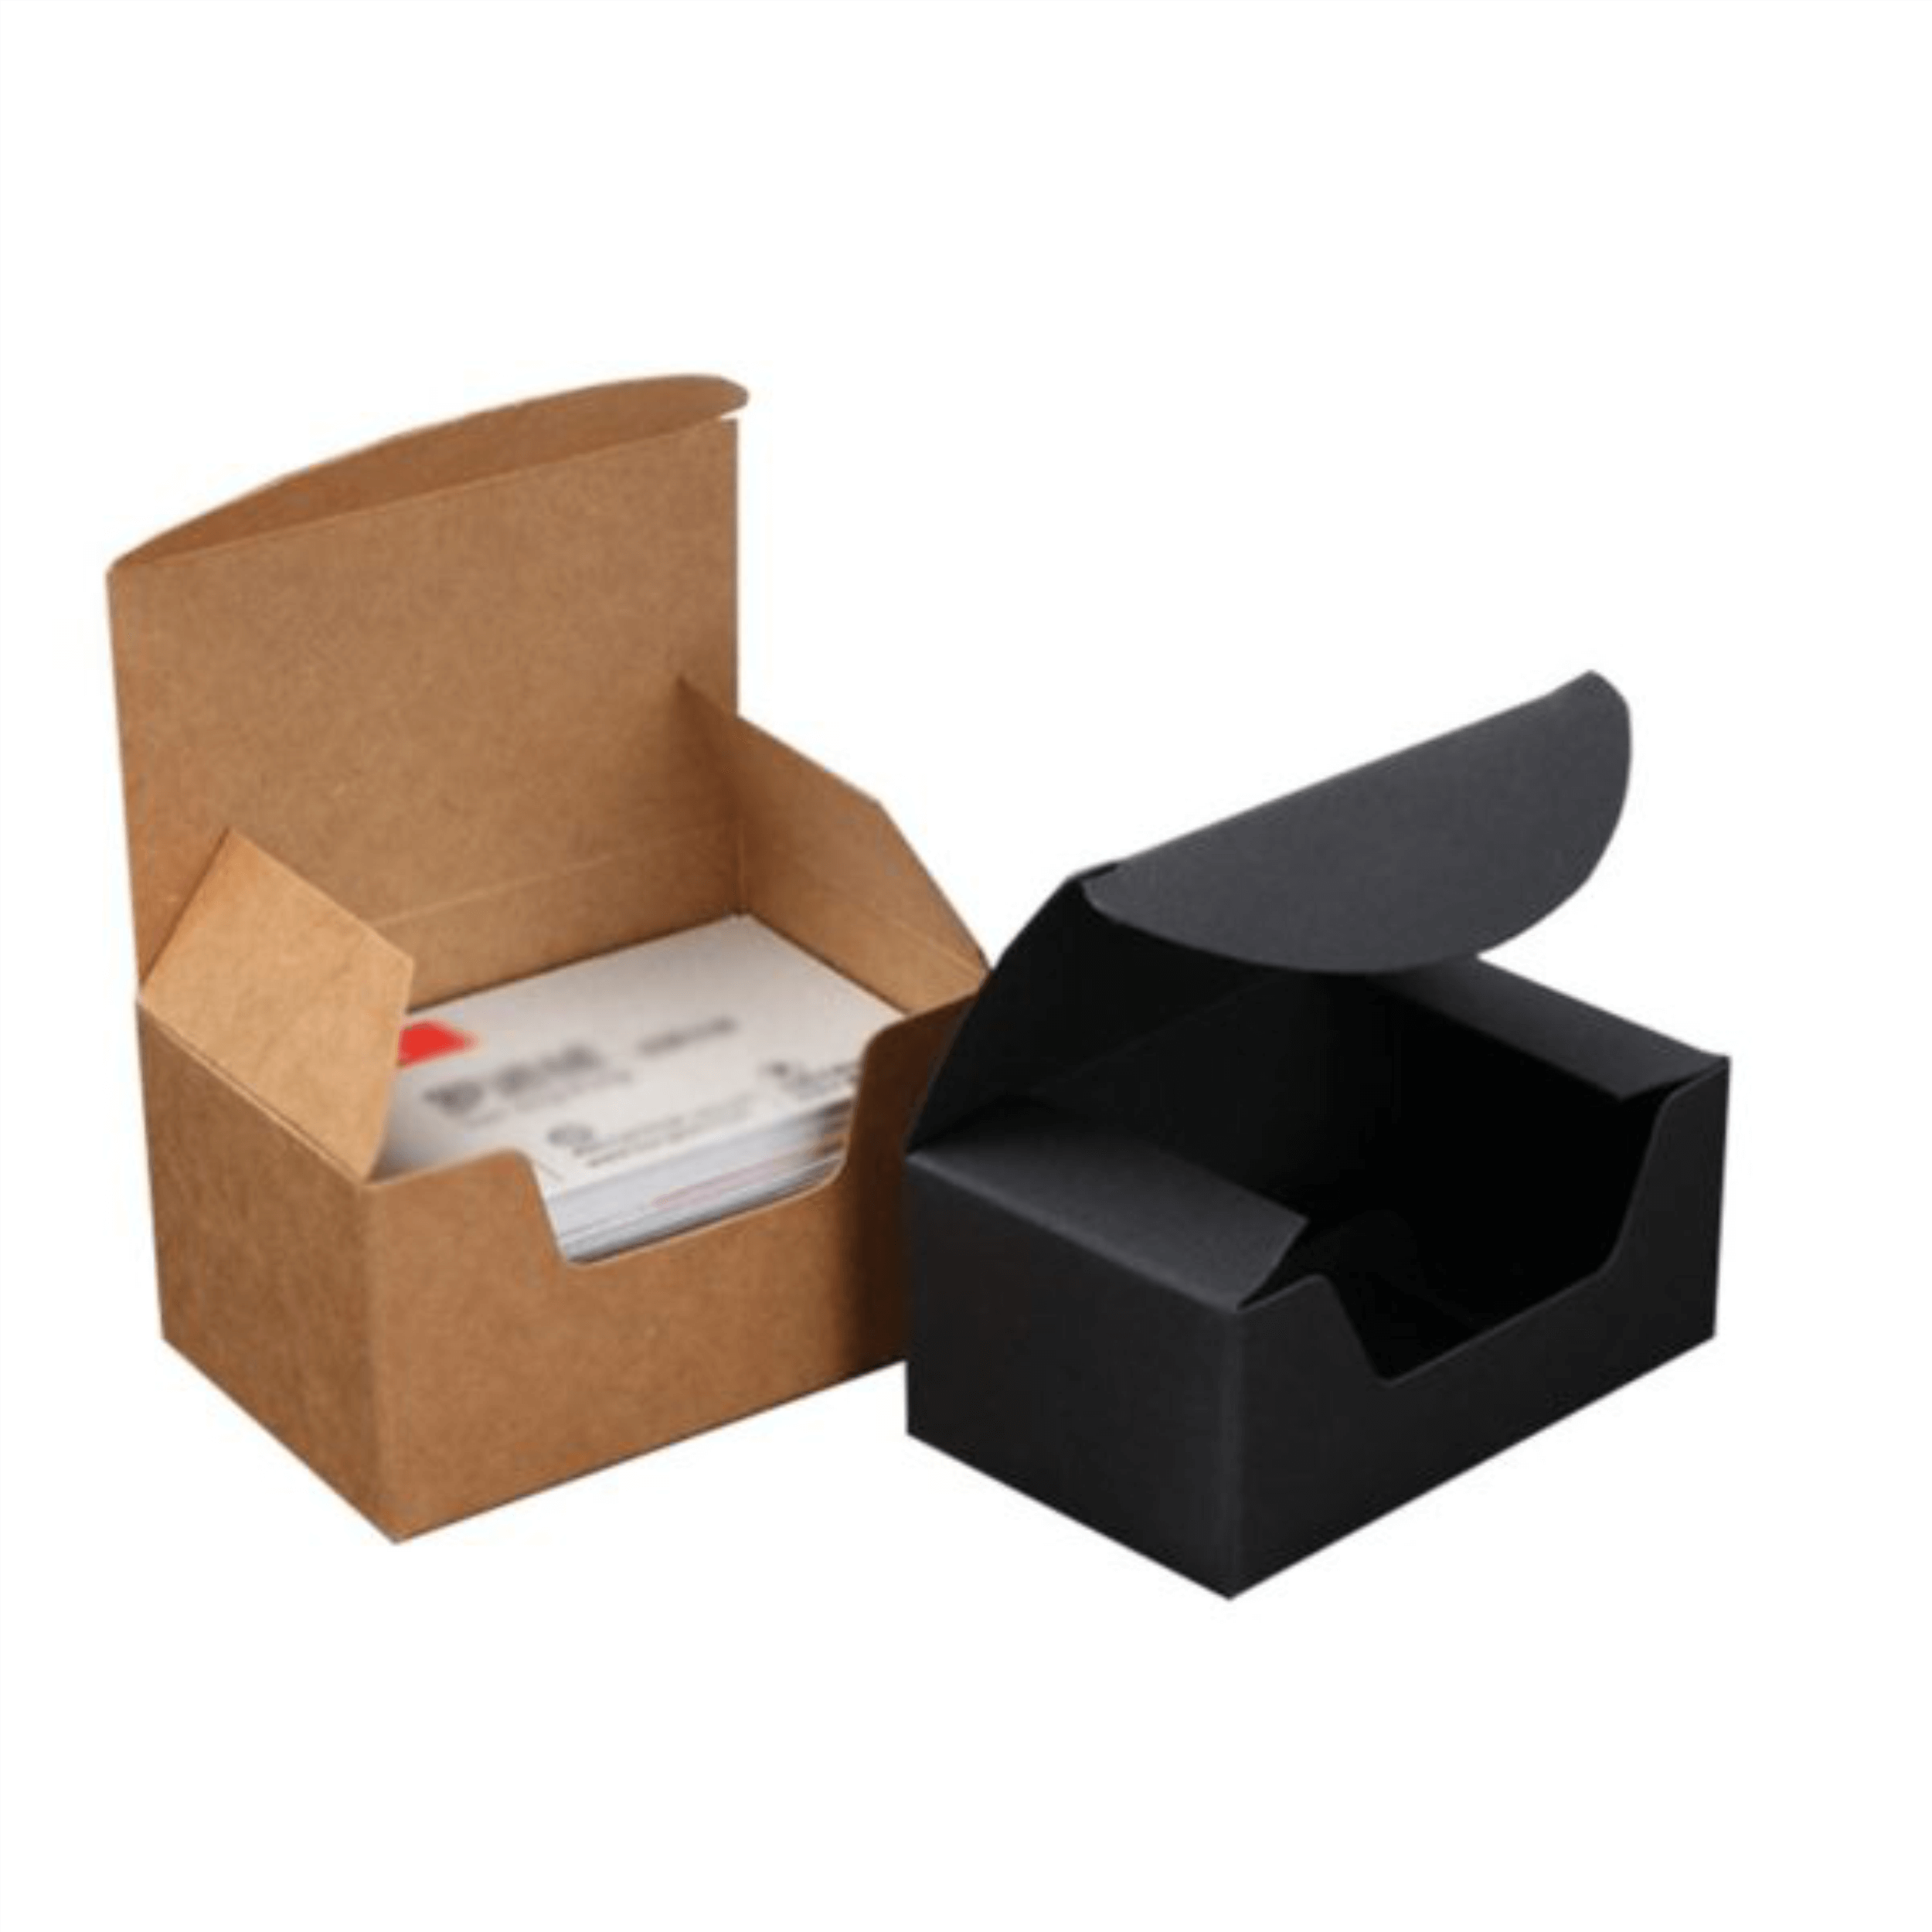 Business card boxes wholesale